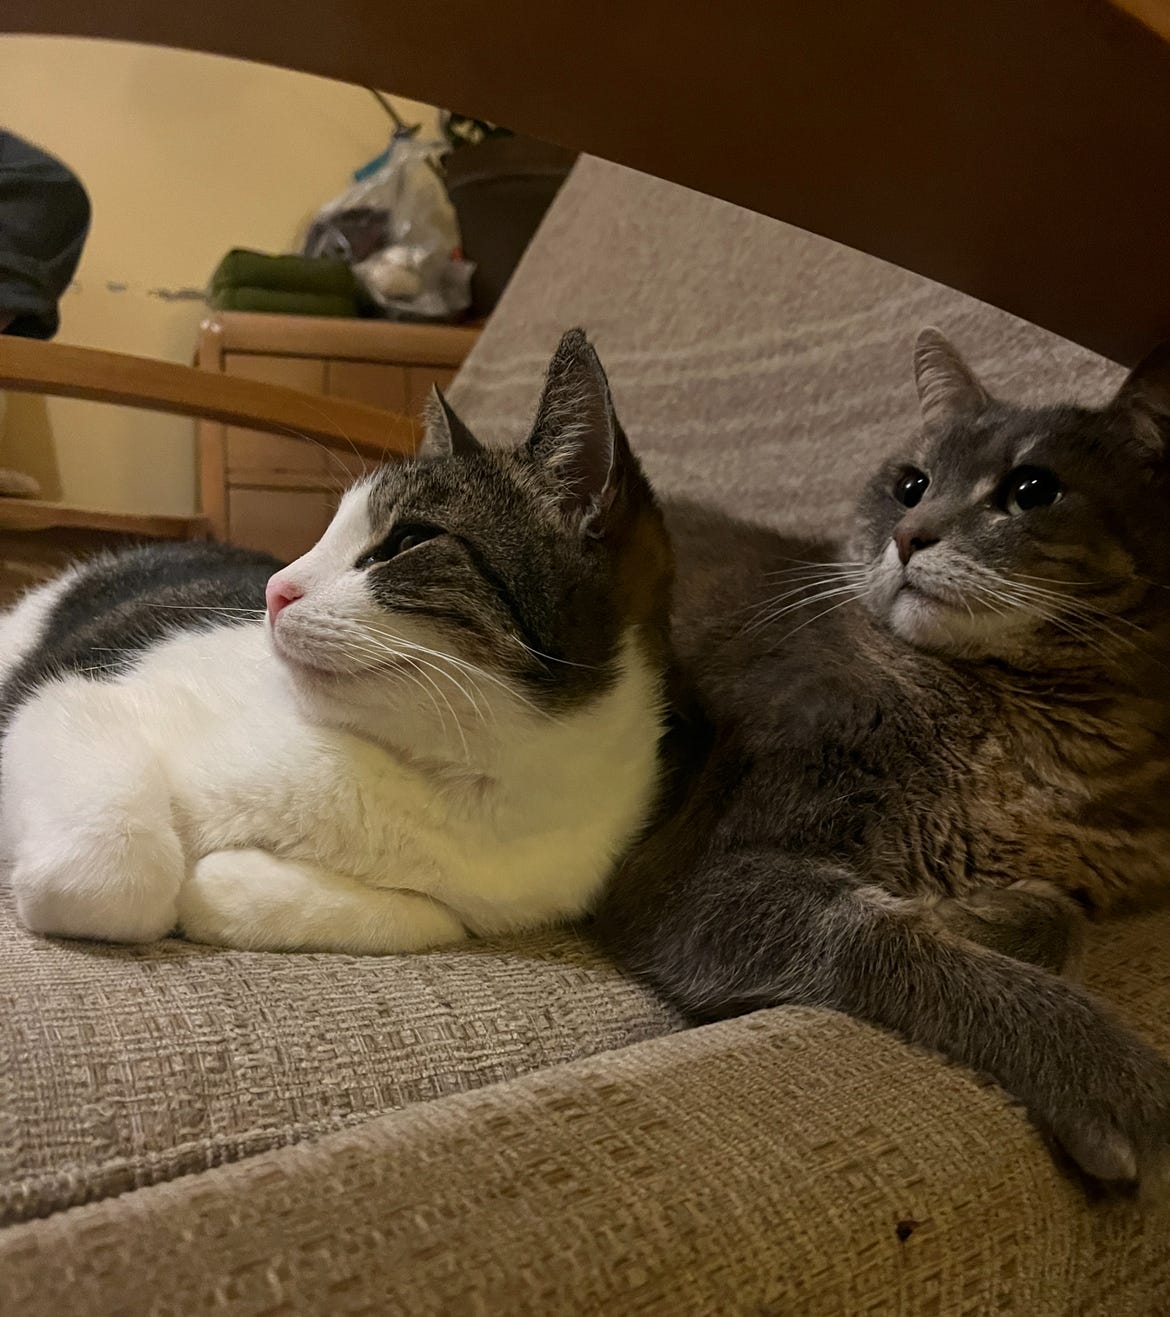 Two cats resting together on a comfy seat.